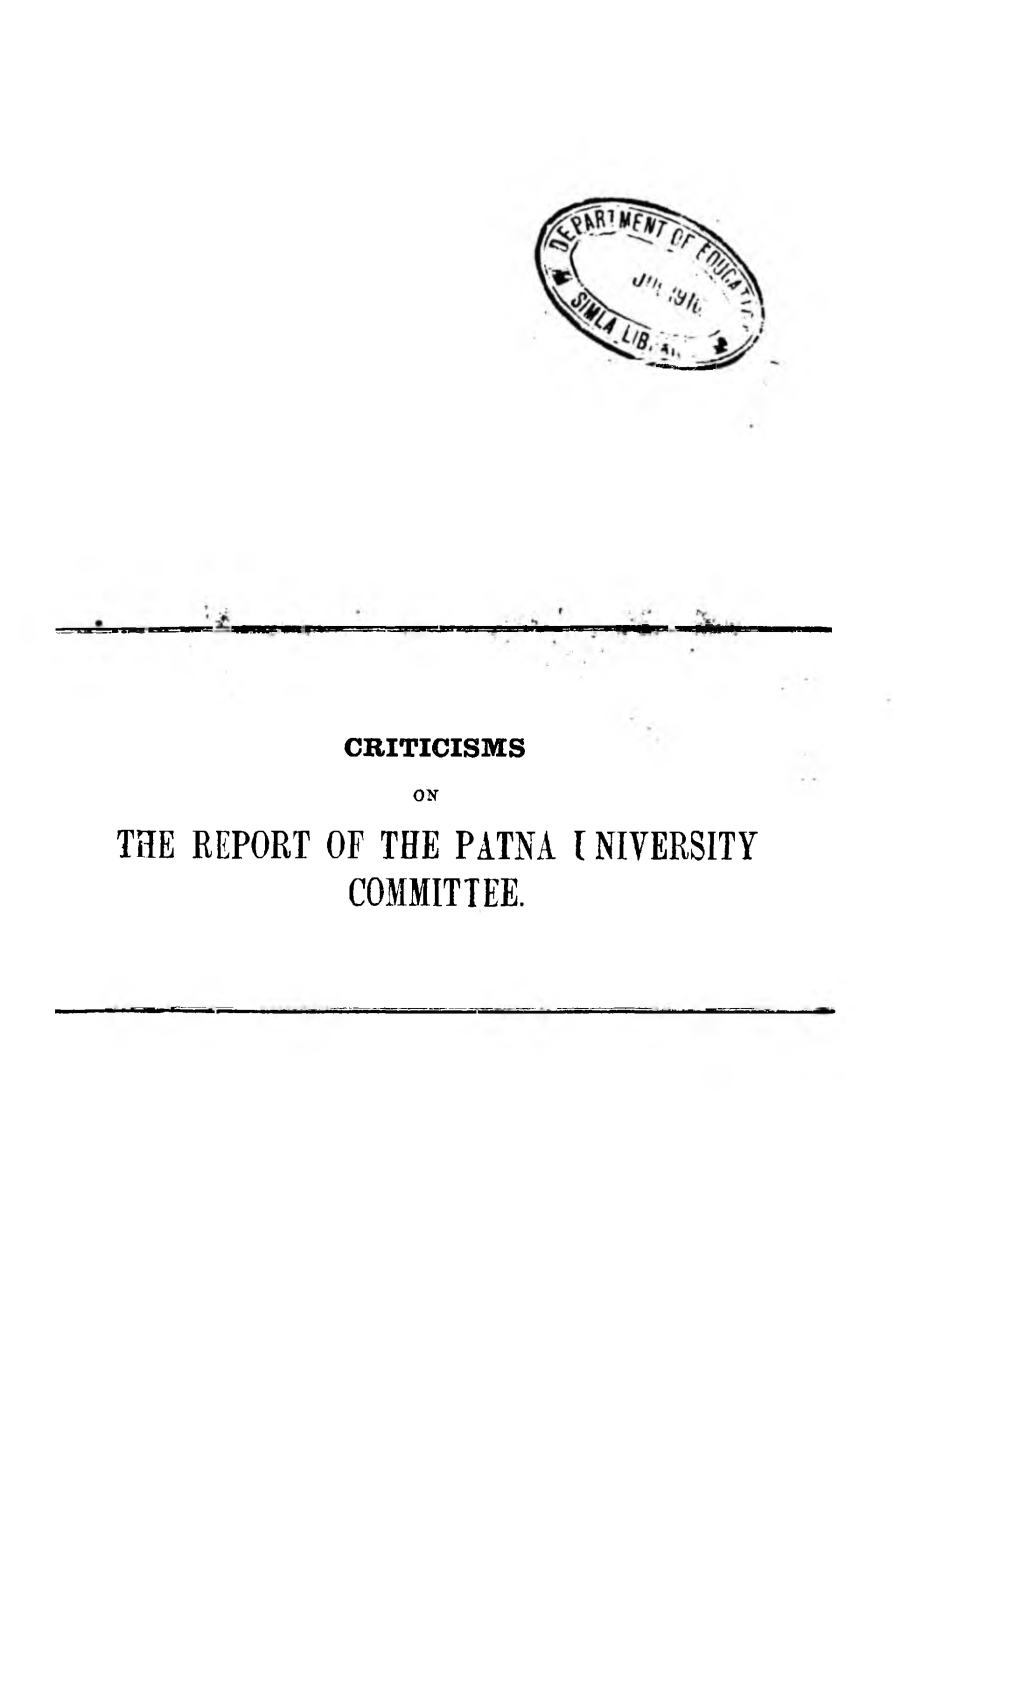 The Report of the Patna Iniversity Committee